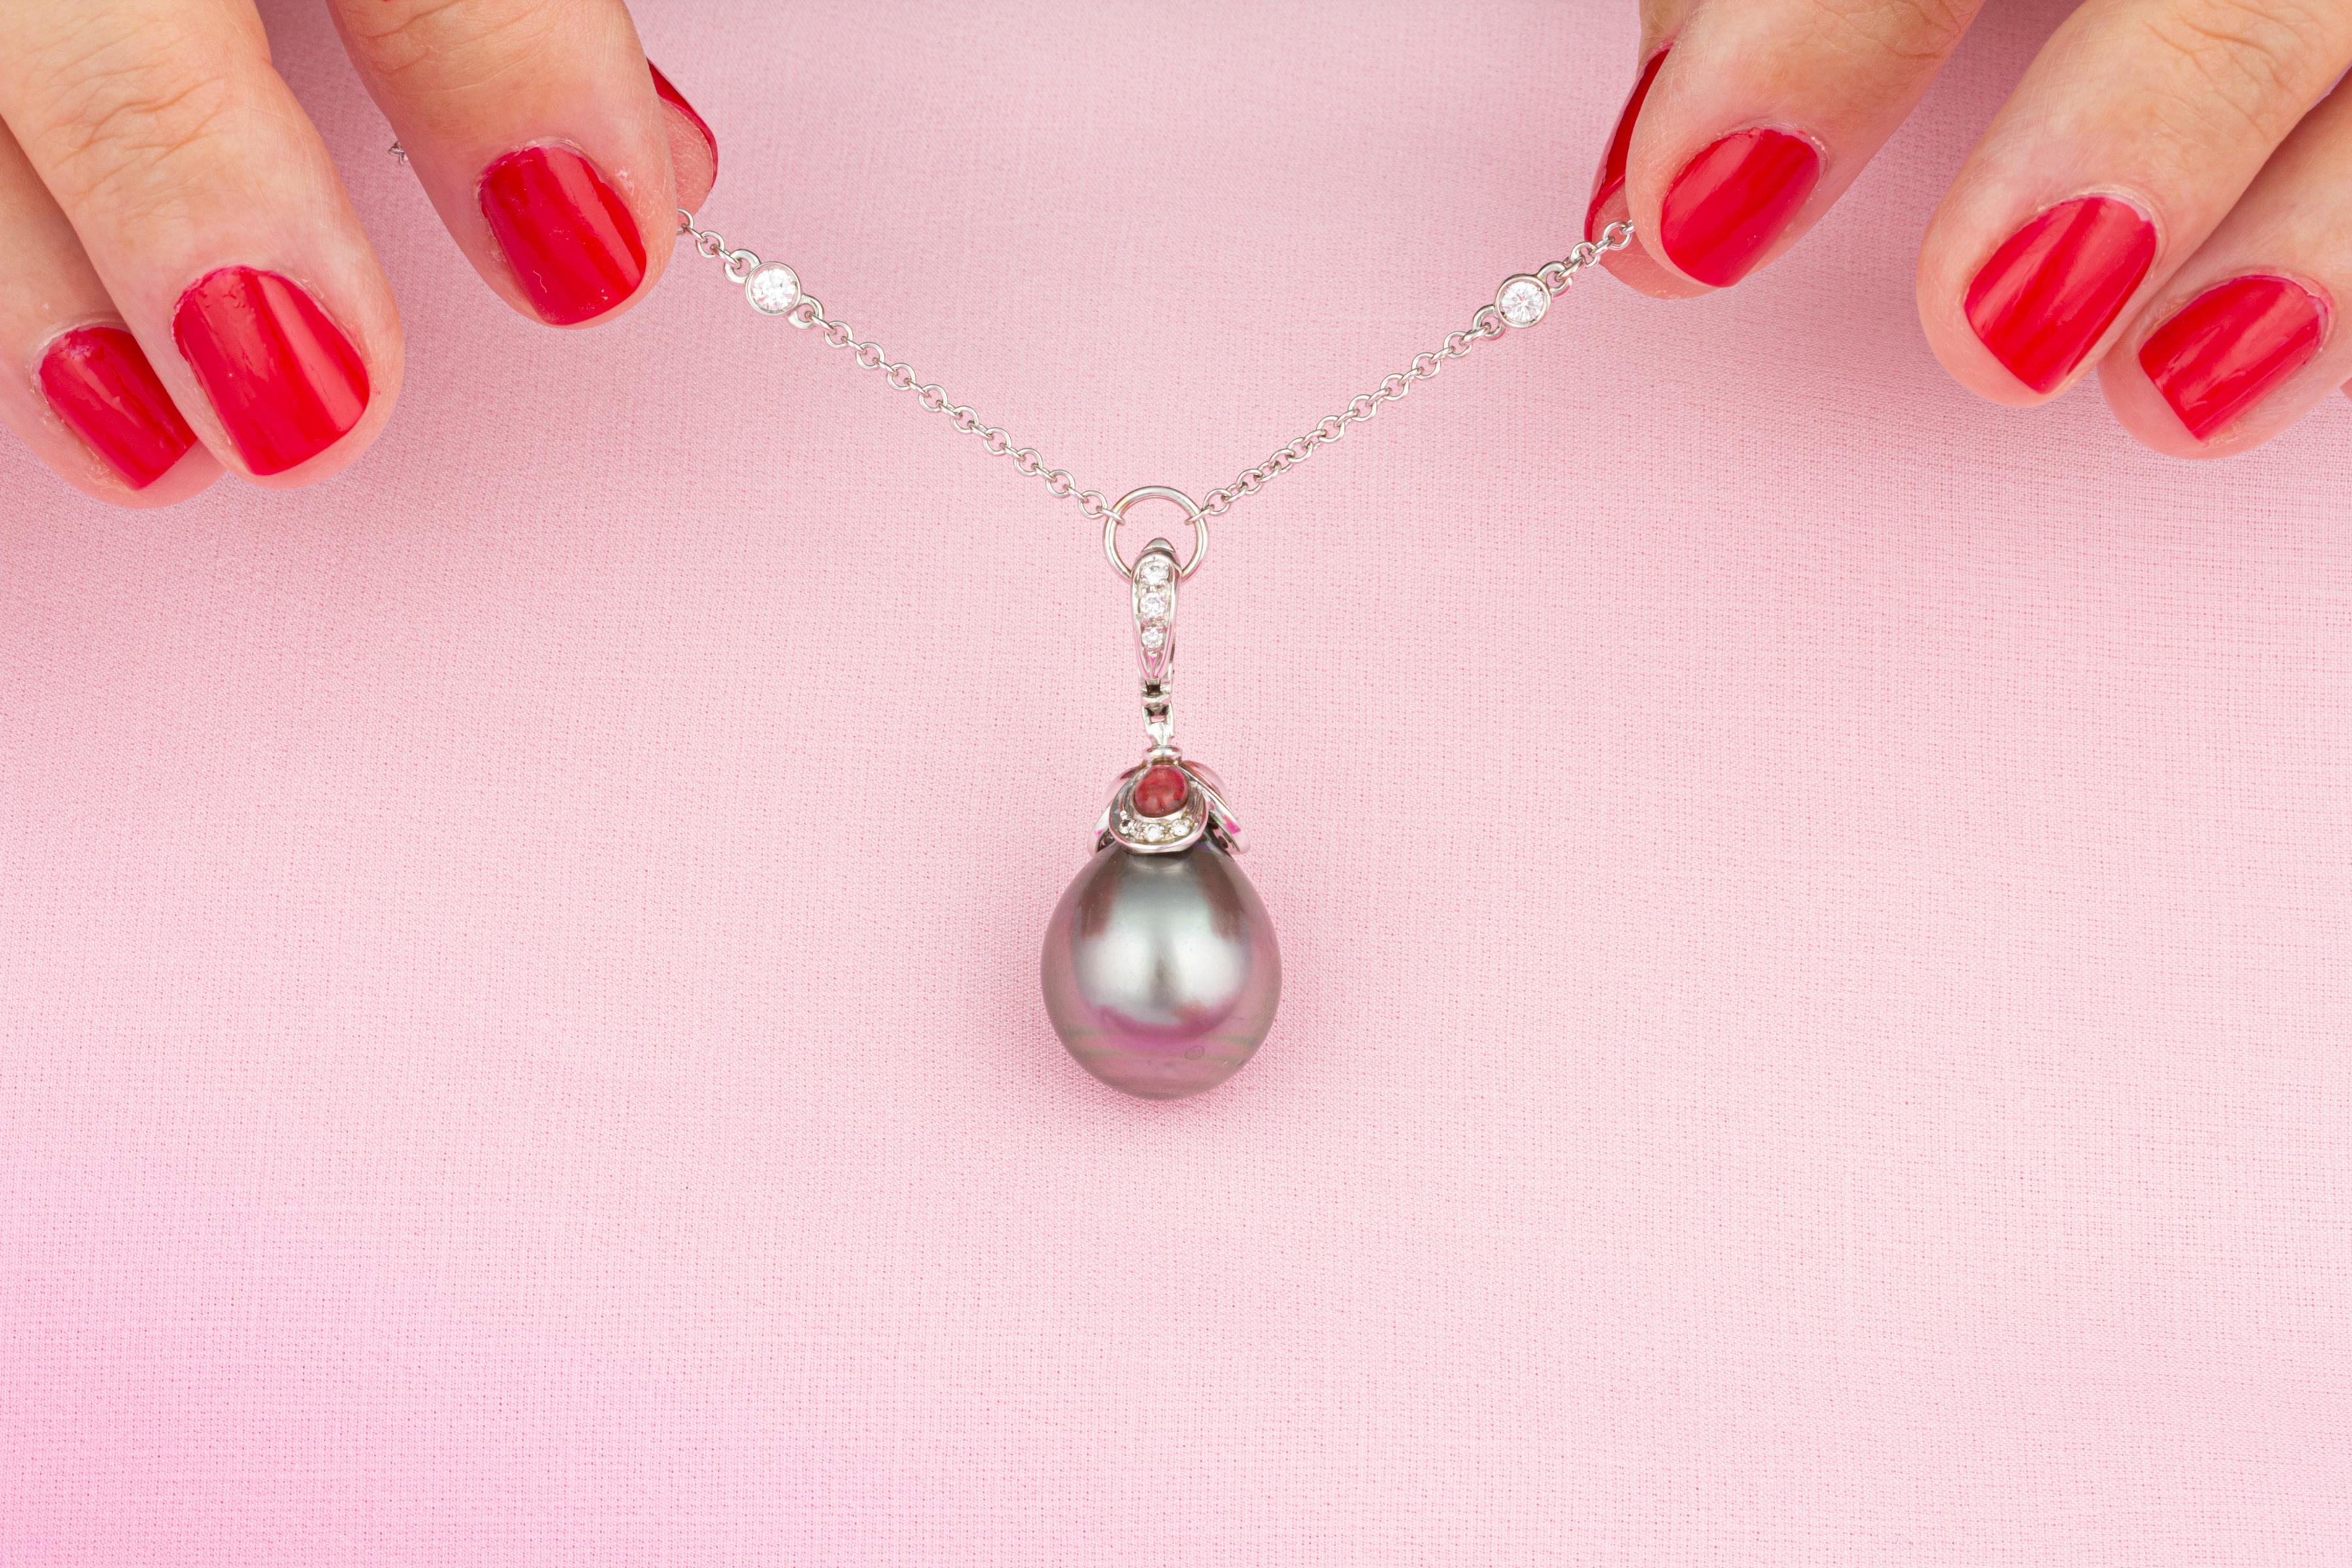 Round Cut Ella Gafter Pearl Diamond Pendant Necklace For Sale